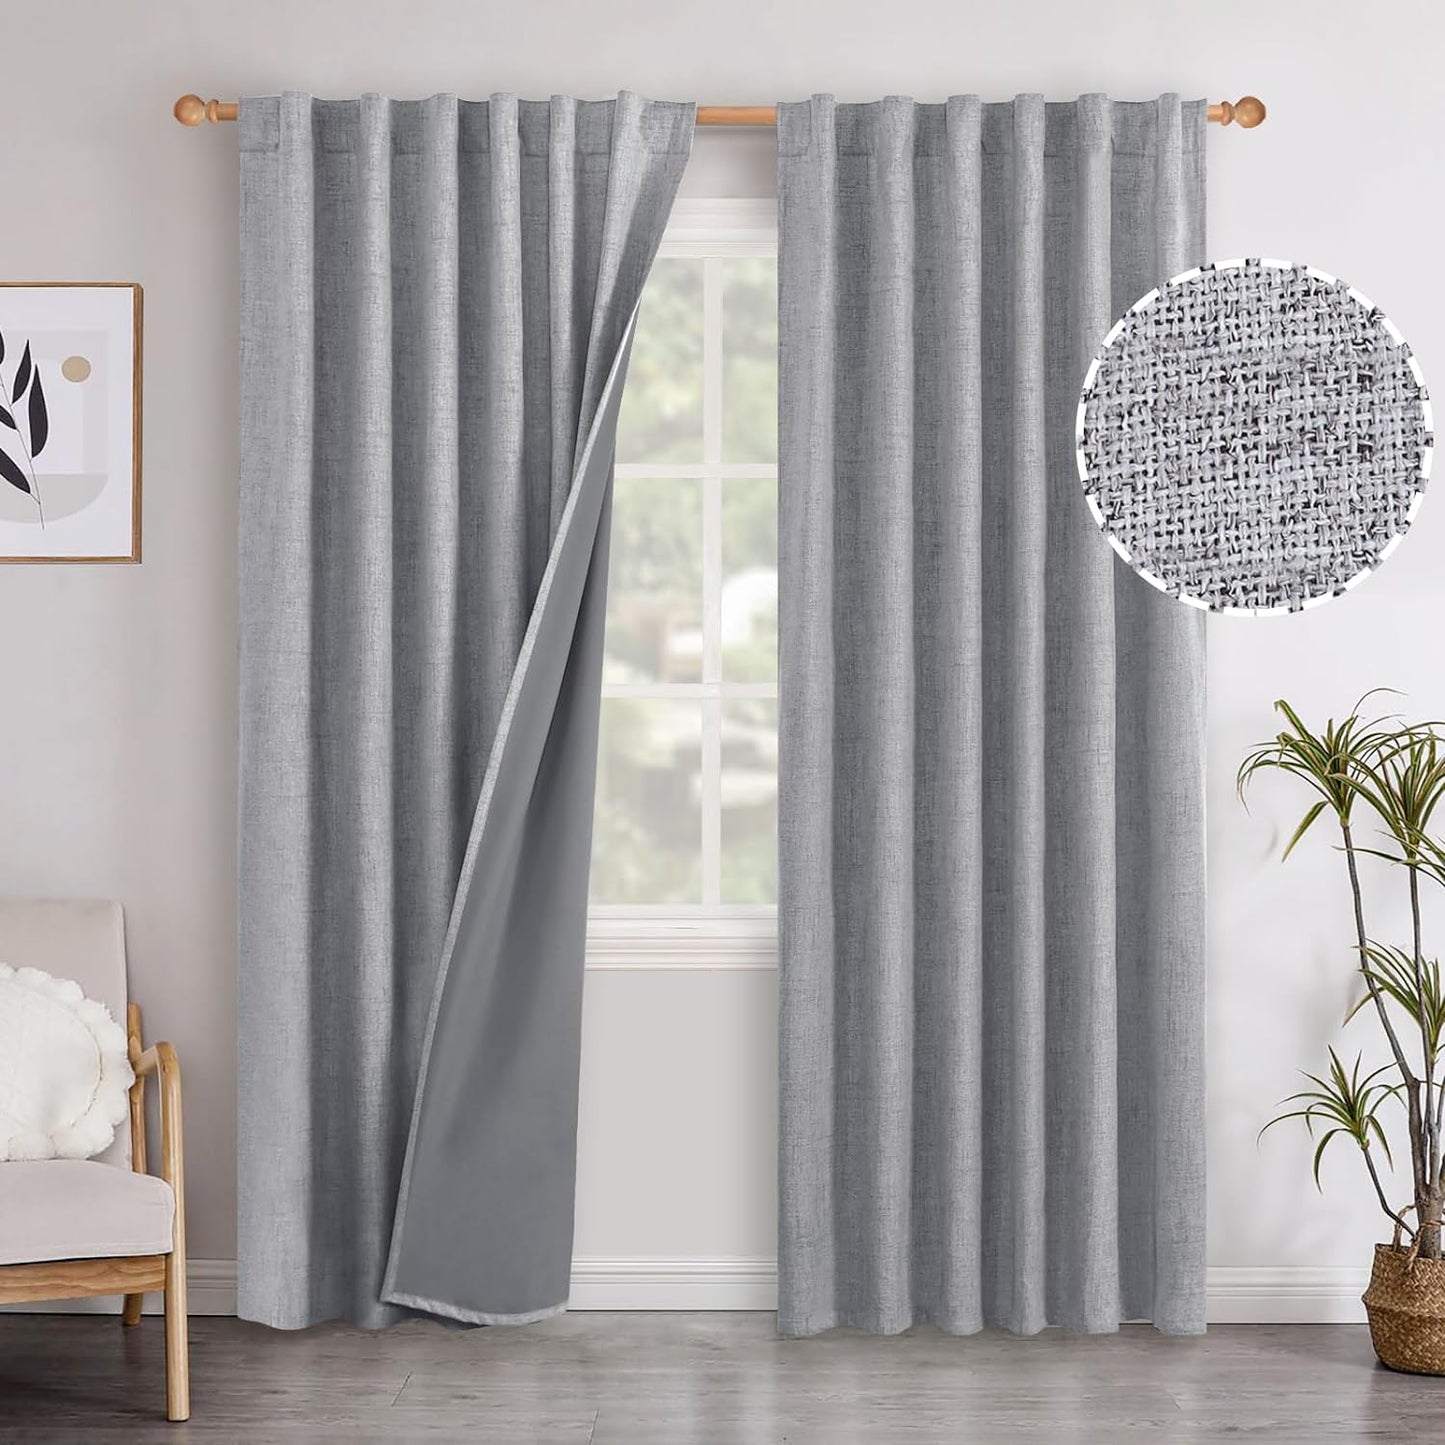 Youngstex Linen Blackout Curtains 63 Inch Length, Grommet Darkening Bedroom Curtains Burlap Linen Window Drapes Thermal Insulated for Basement Summer Heat, 2 Panels, 52 X 63 Inch, Beige  YoungsTex Back Tab/Grey 52W X 95L 